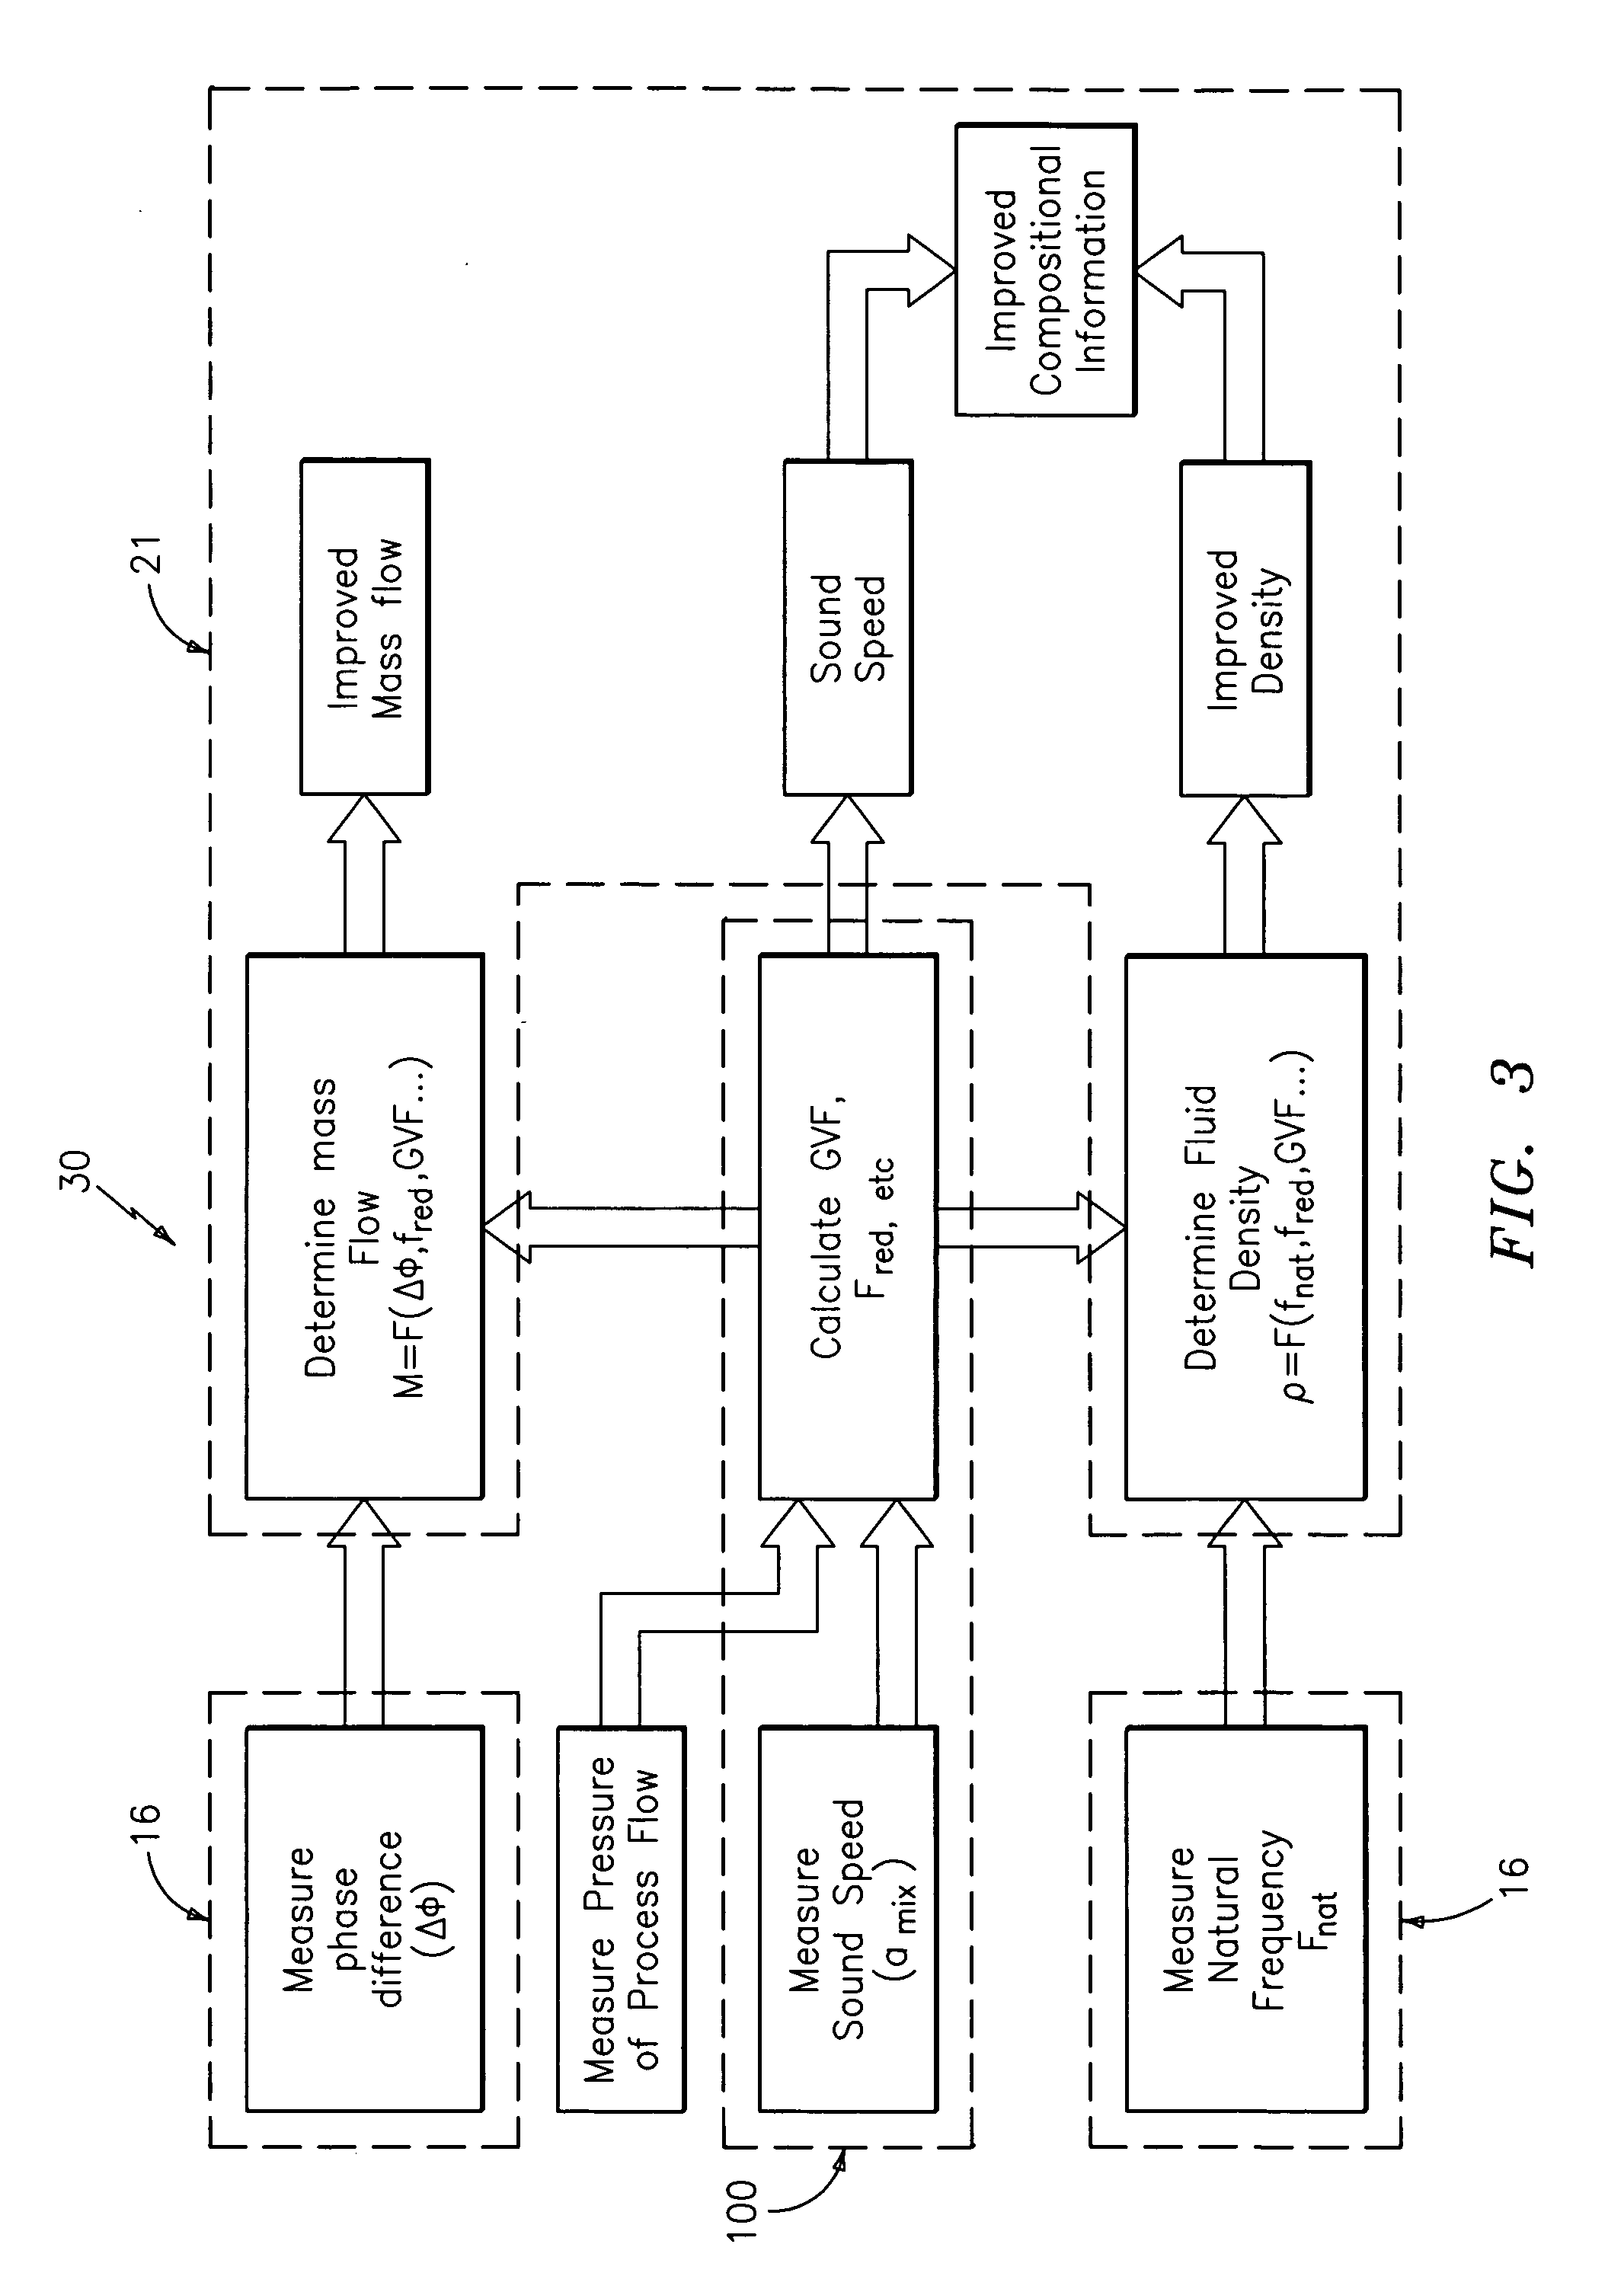 Apparatus and method for compensating a coriolis meter